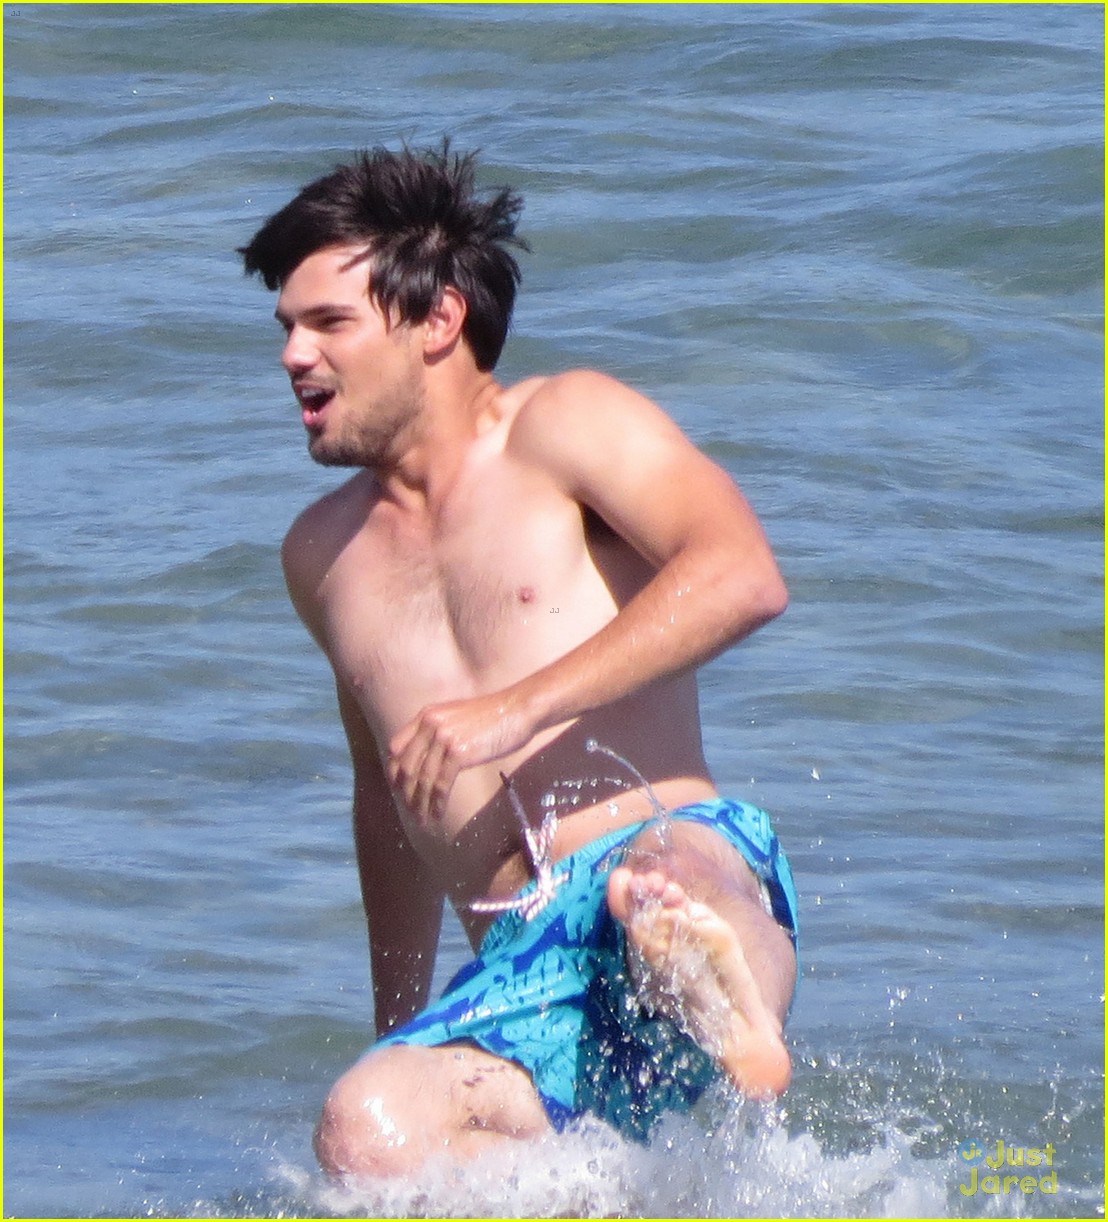 taylor lautner goes shirtless for run the tide beach scenes 25